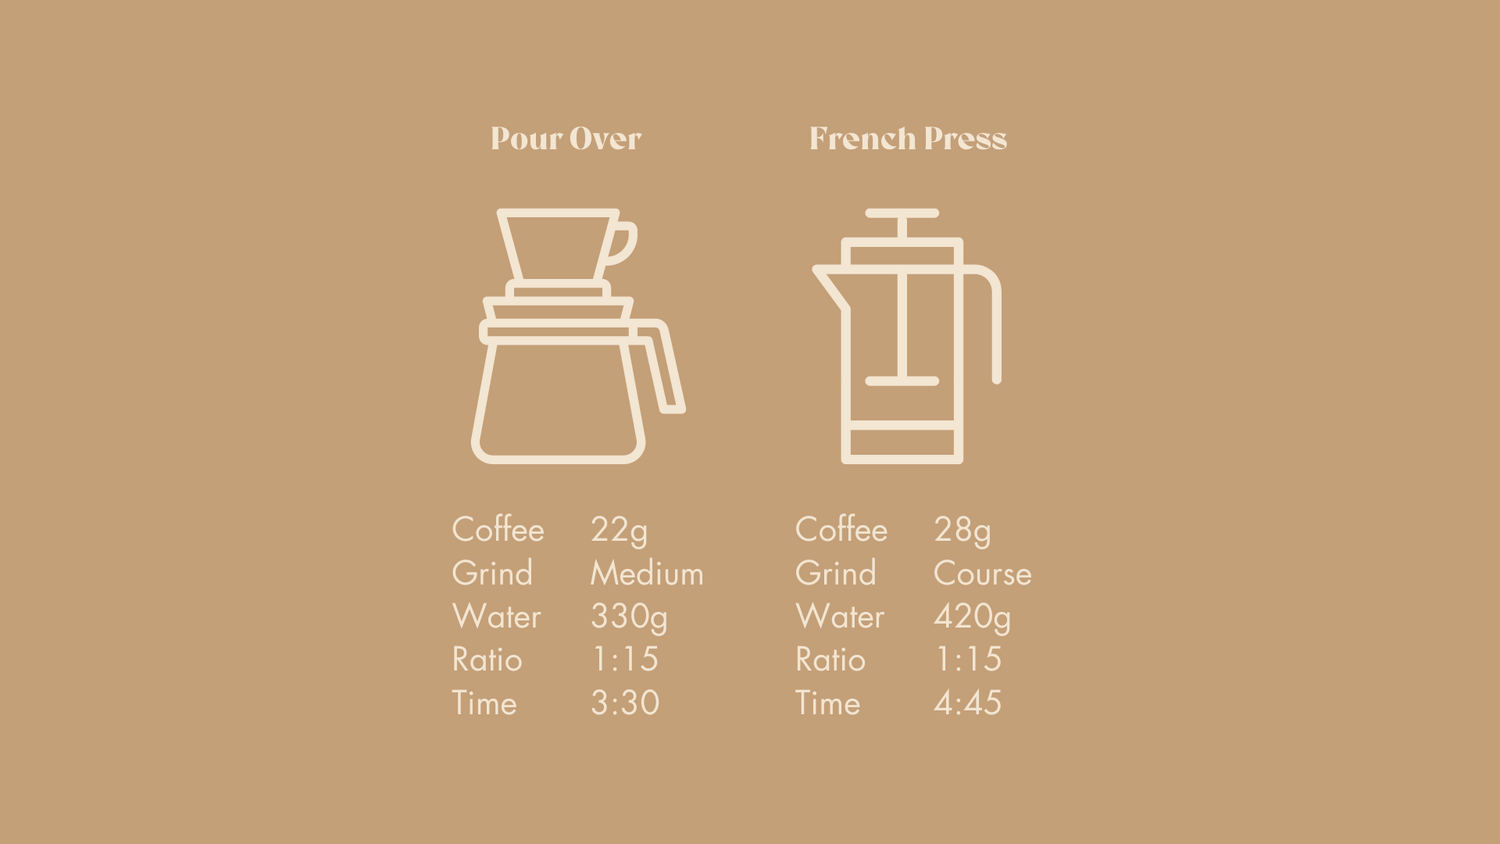 Instructions on how to use coffee beans to make coffee with a pour over and french press